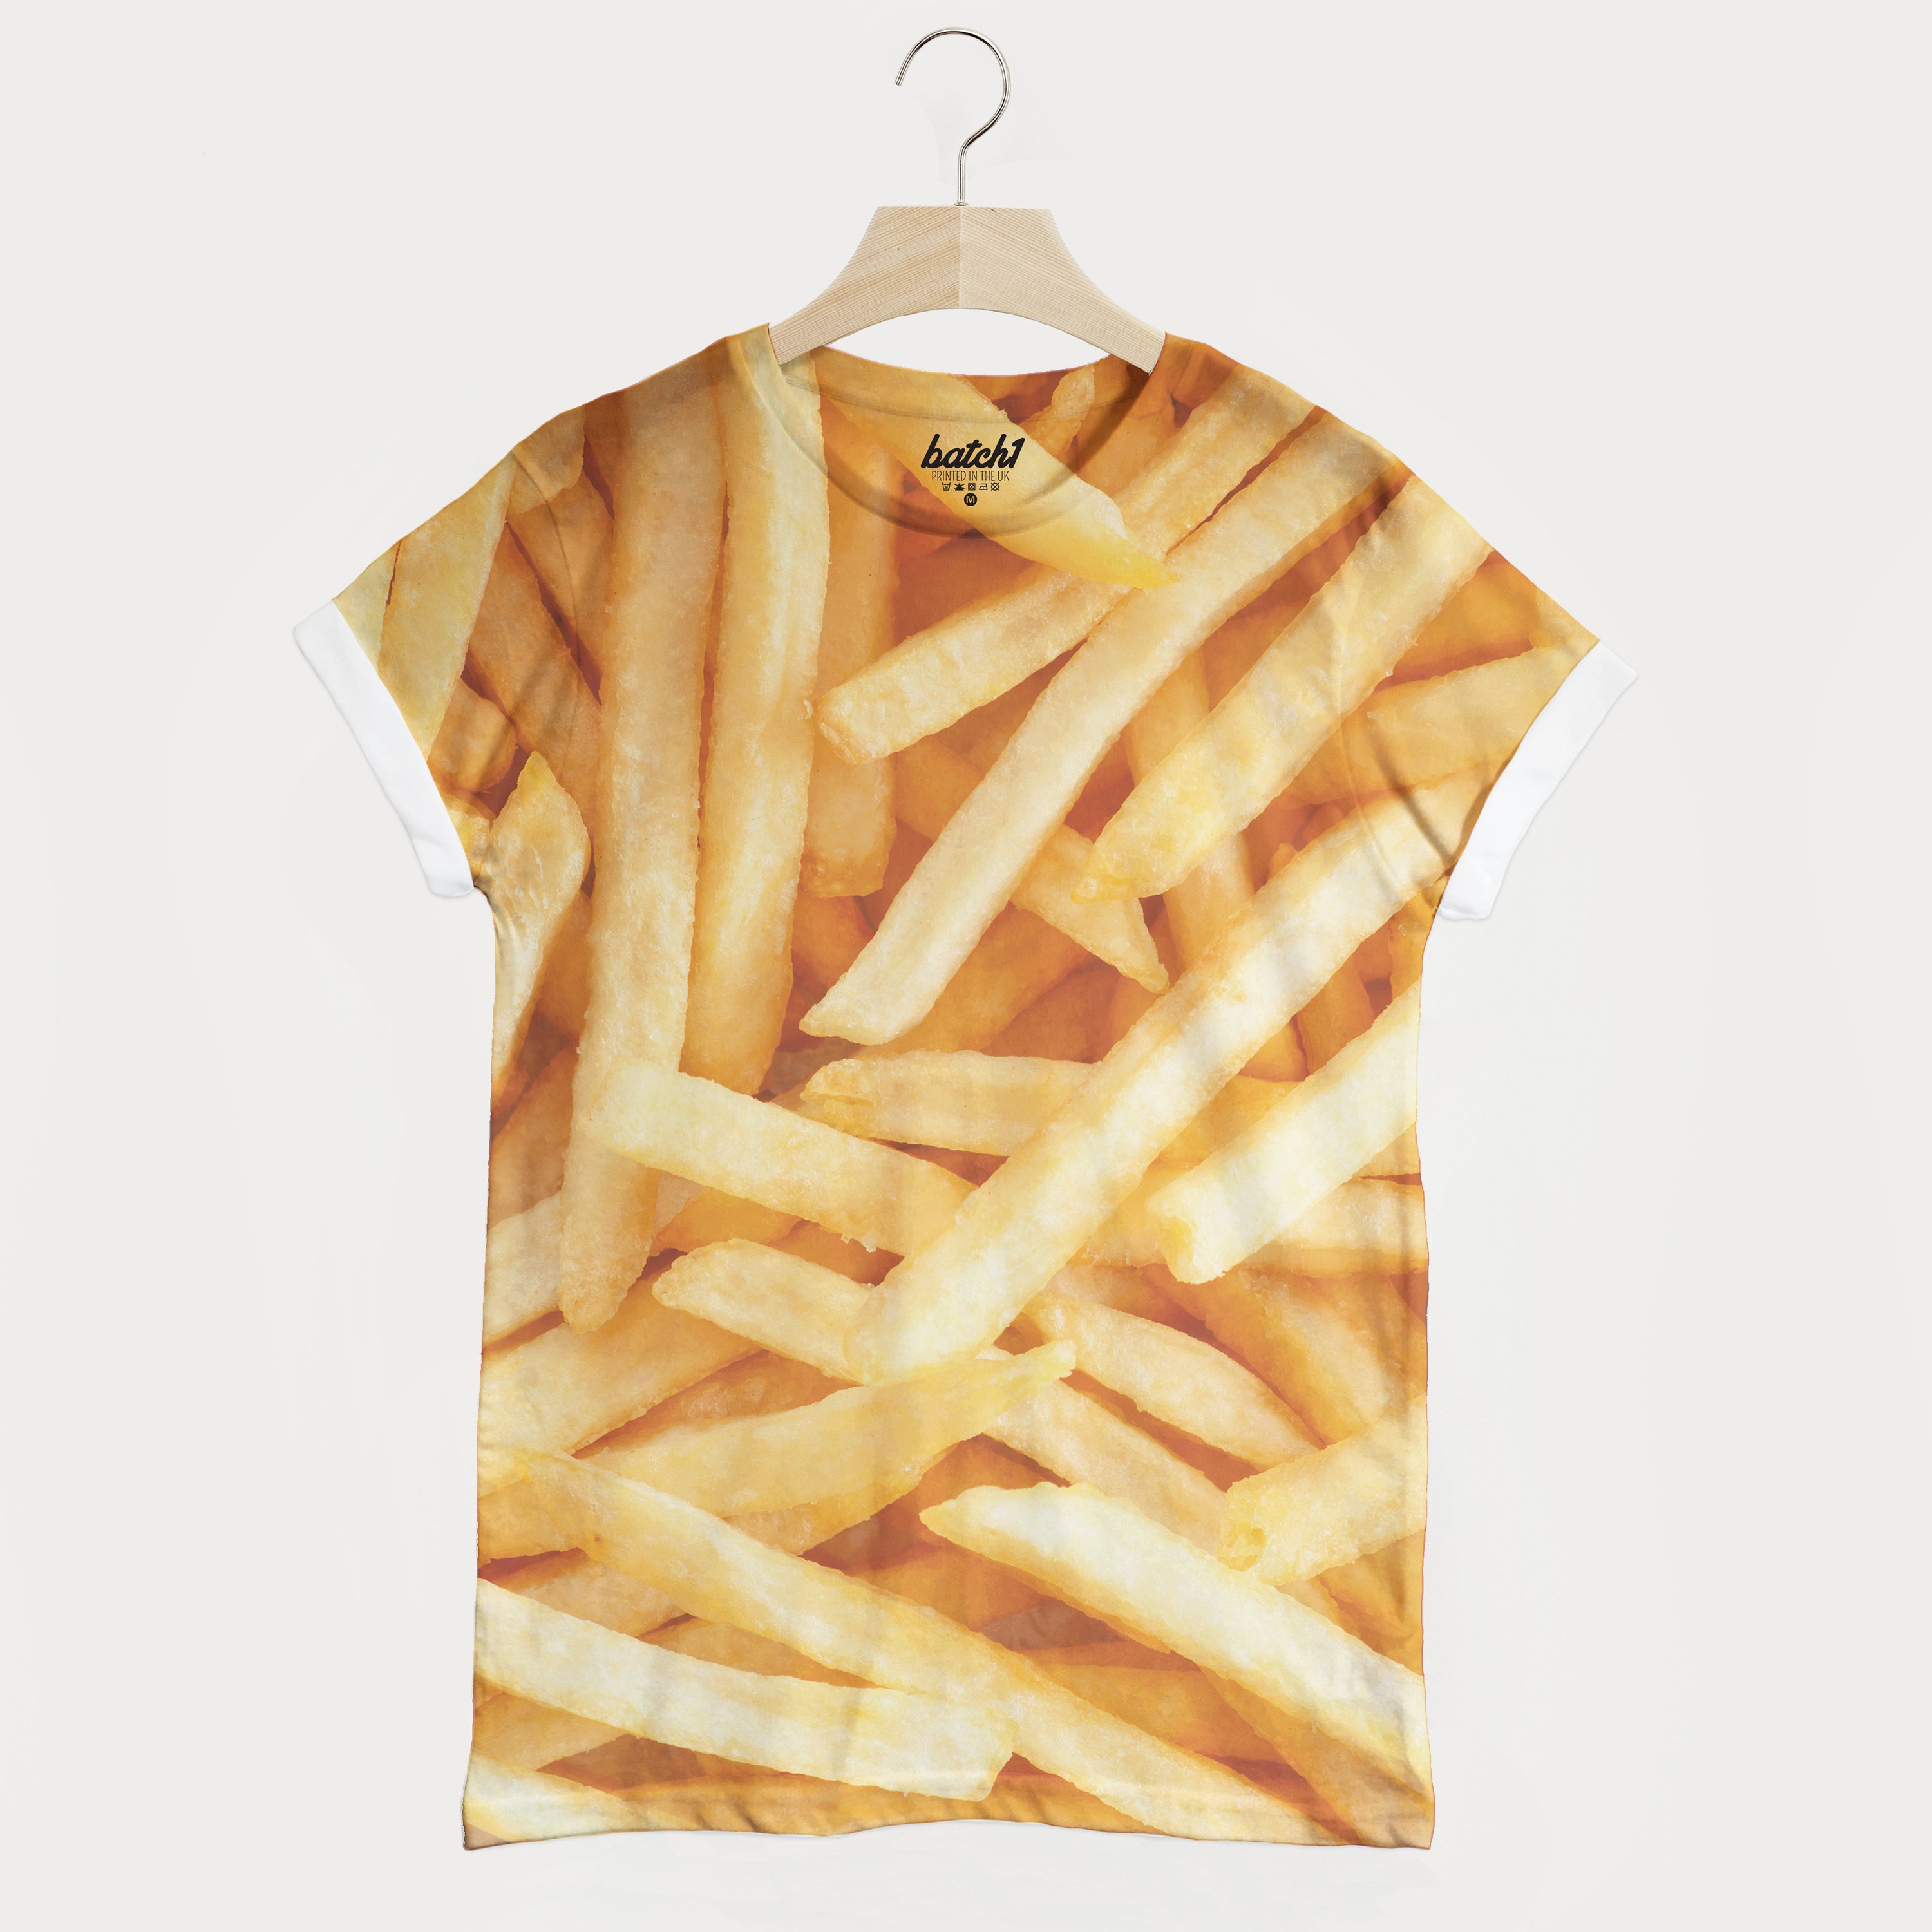 French Fries All Photo Print Unisex Junk Food Fashion - Etsy